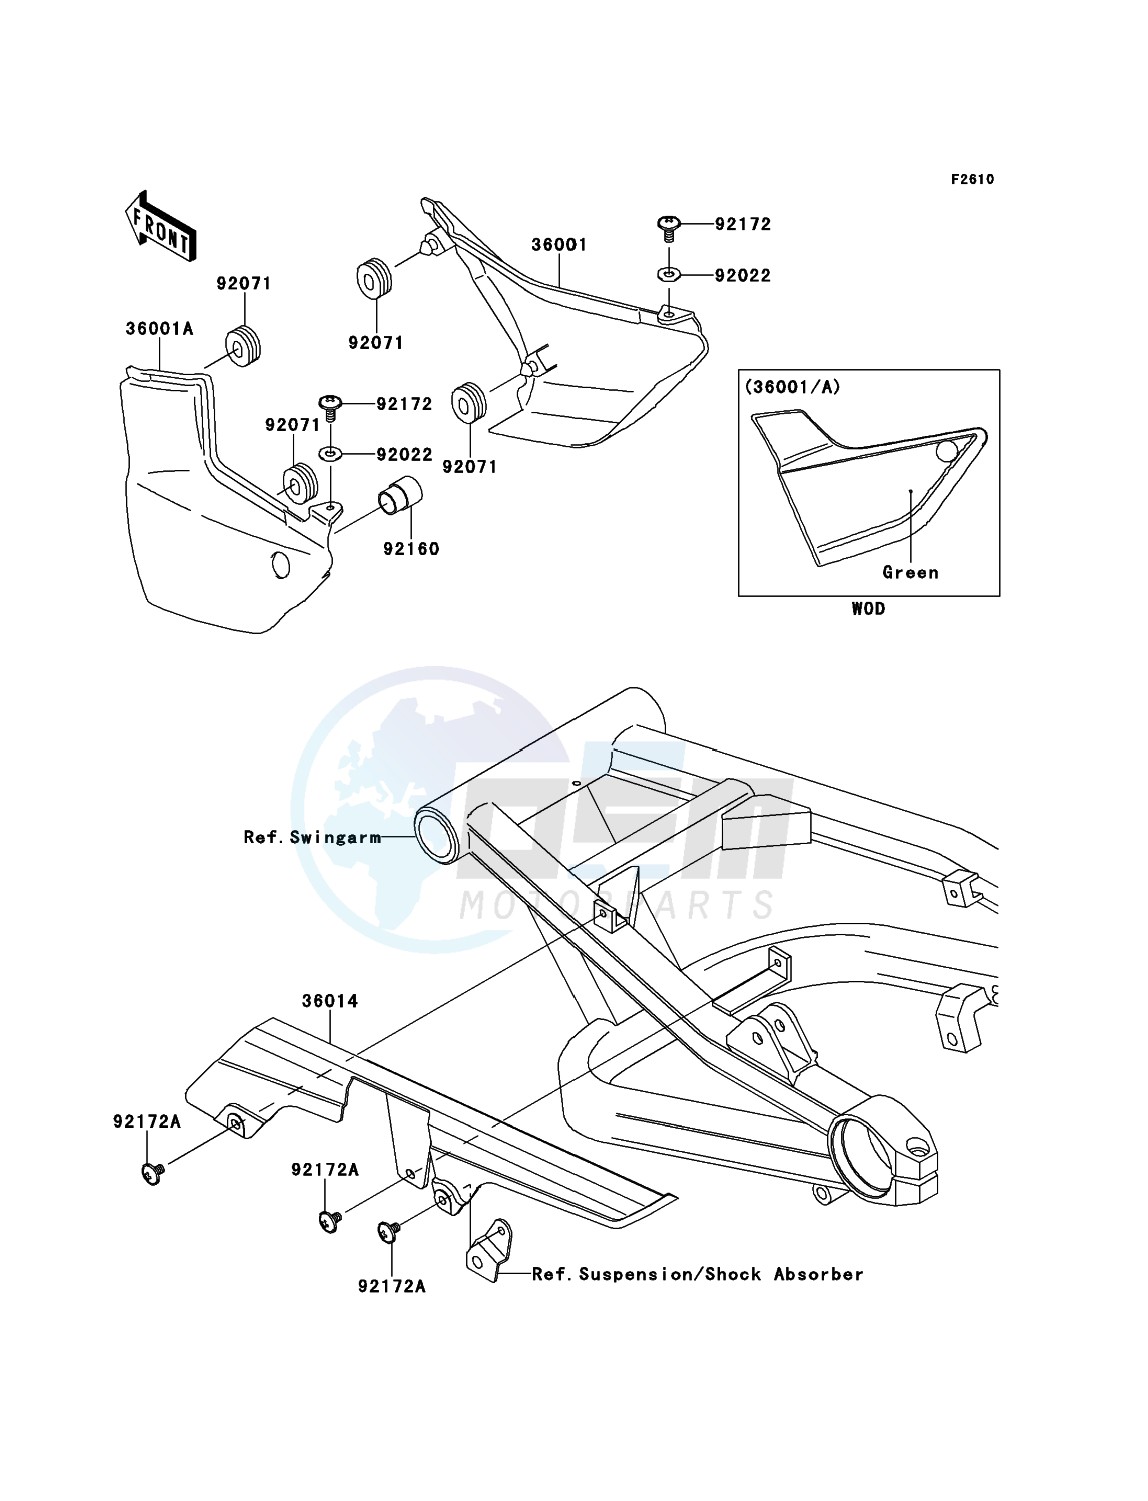 Side Covers/Chain Cover blueprint